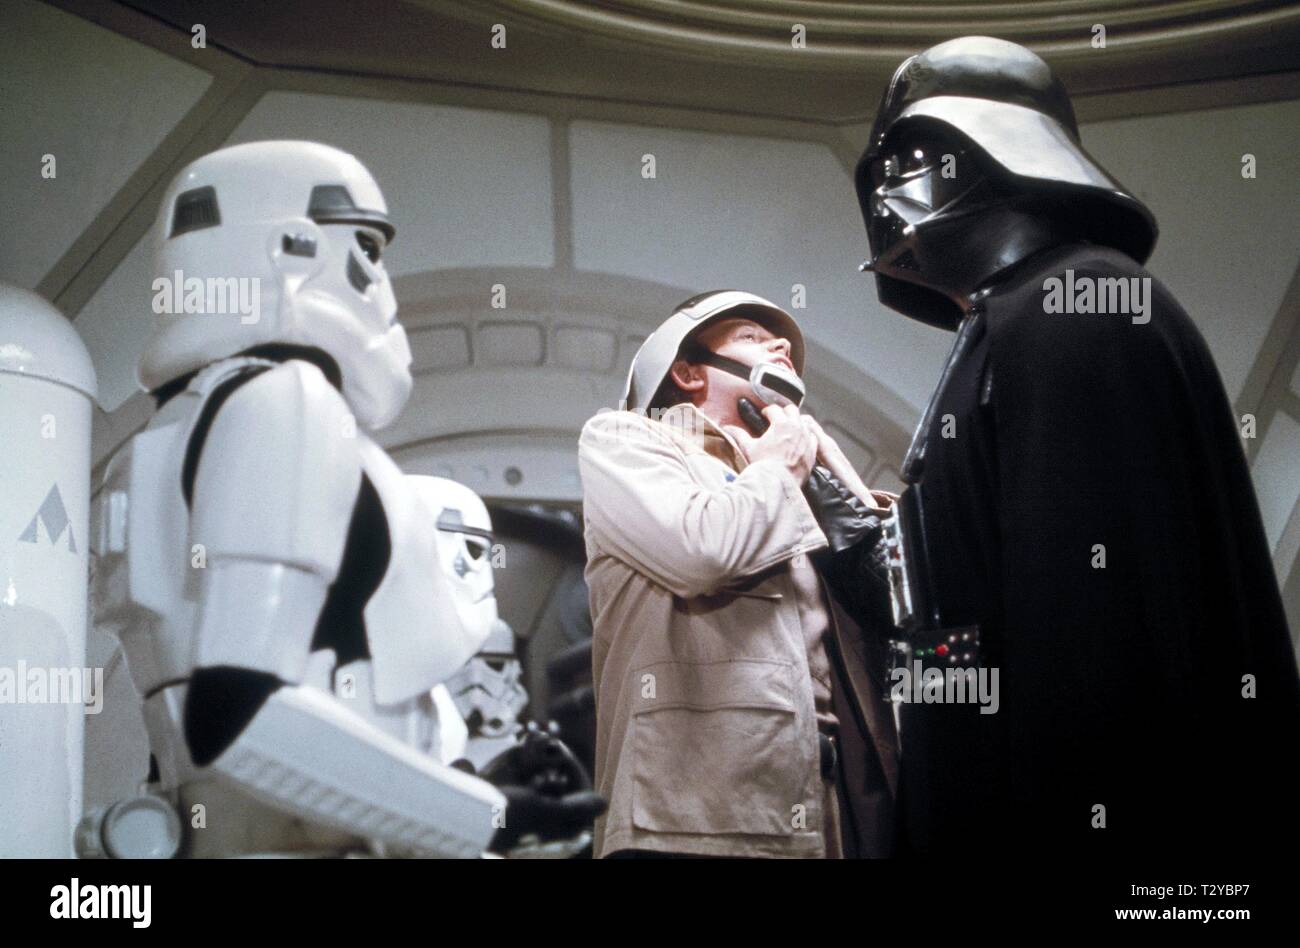 DAVID PROWSE, STAR WARS: EPISODE IV - A NEW HOPE, 1977 Stock Photo